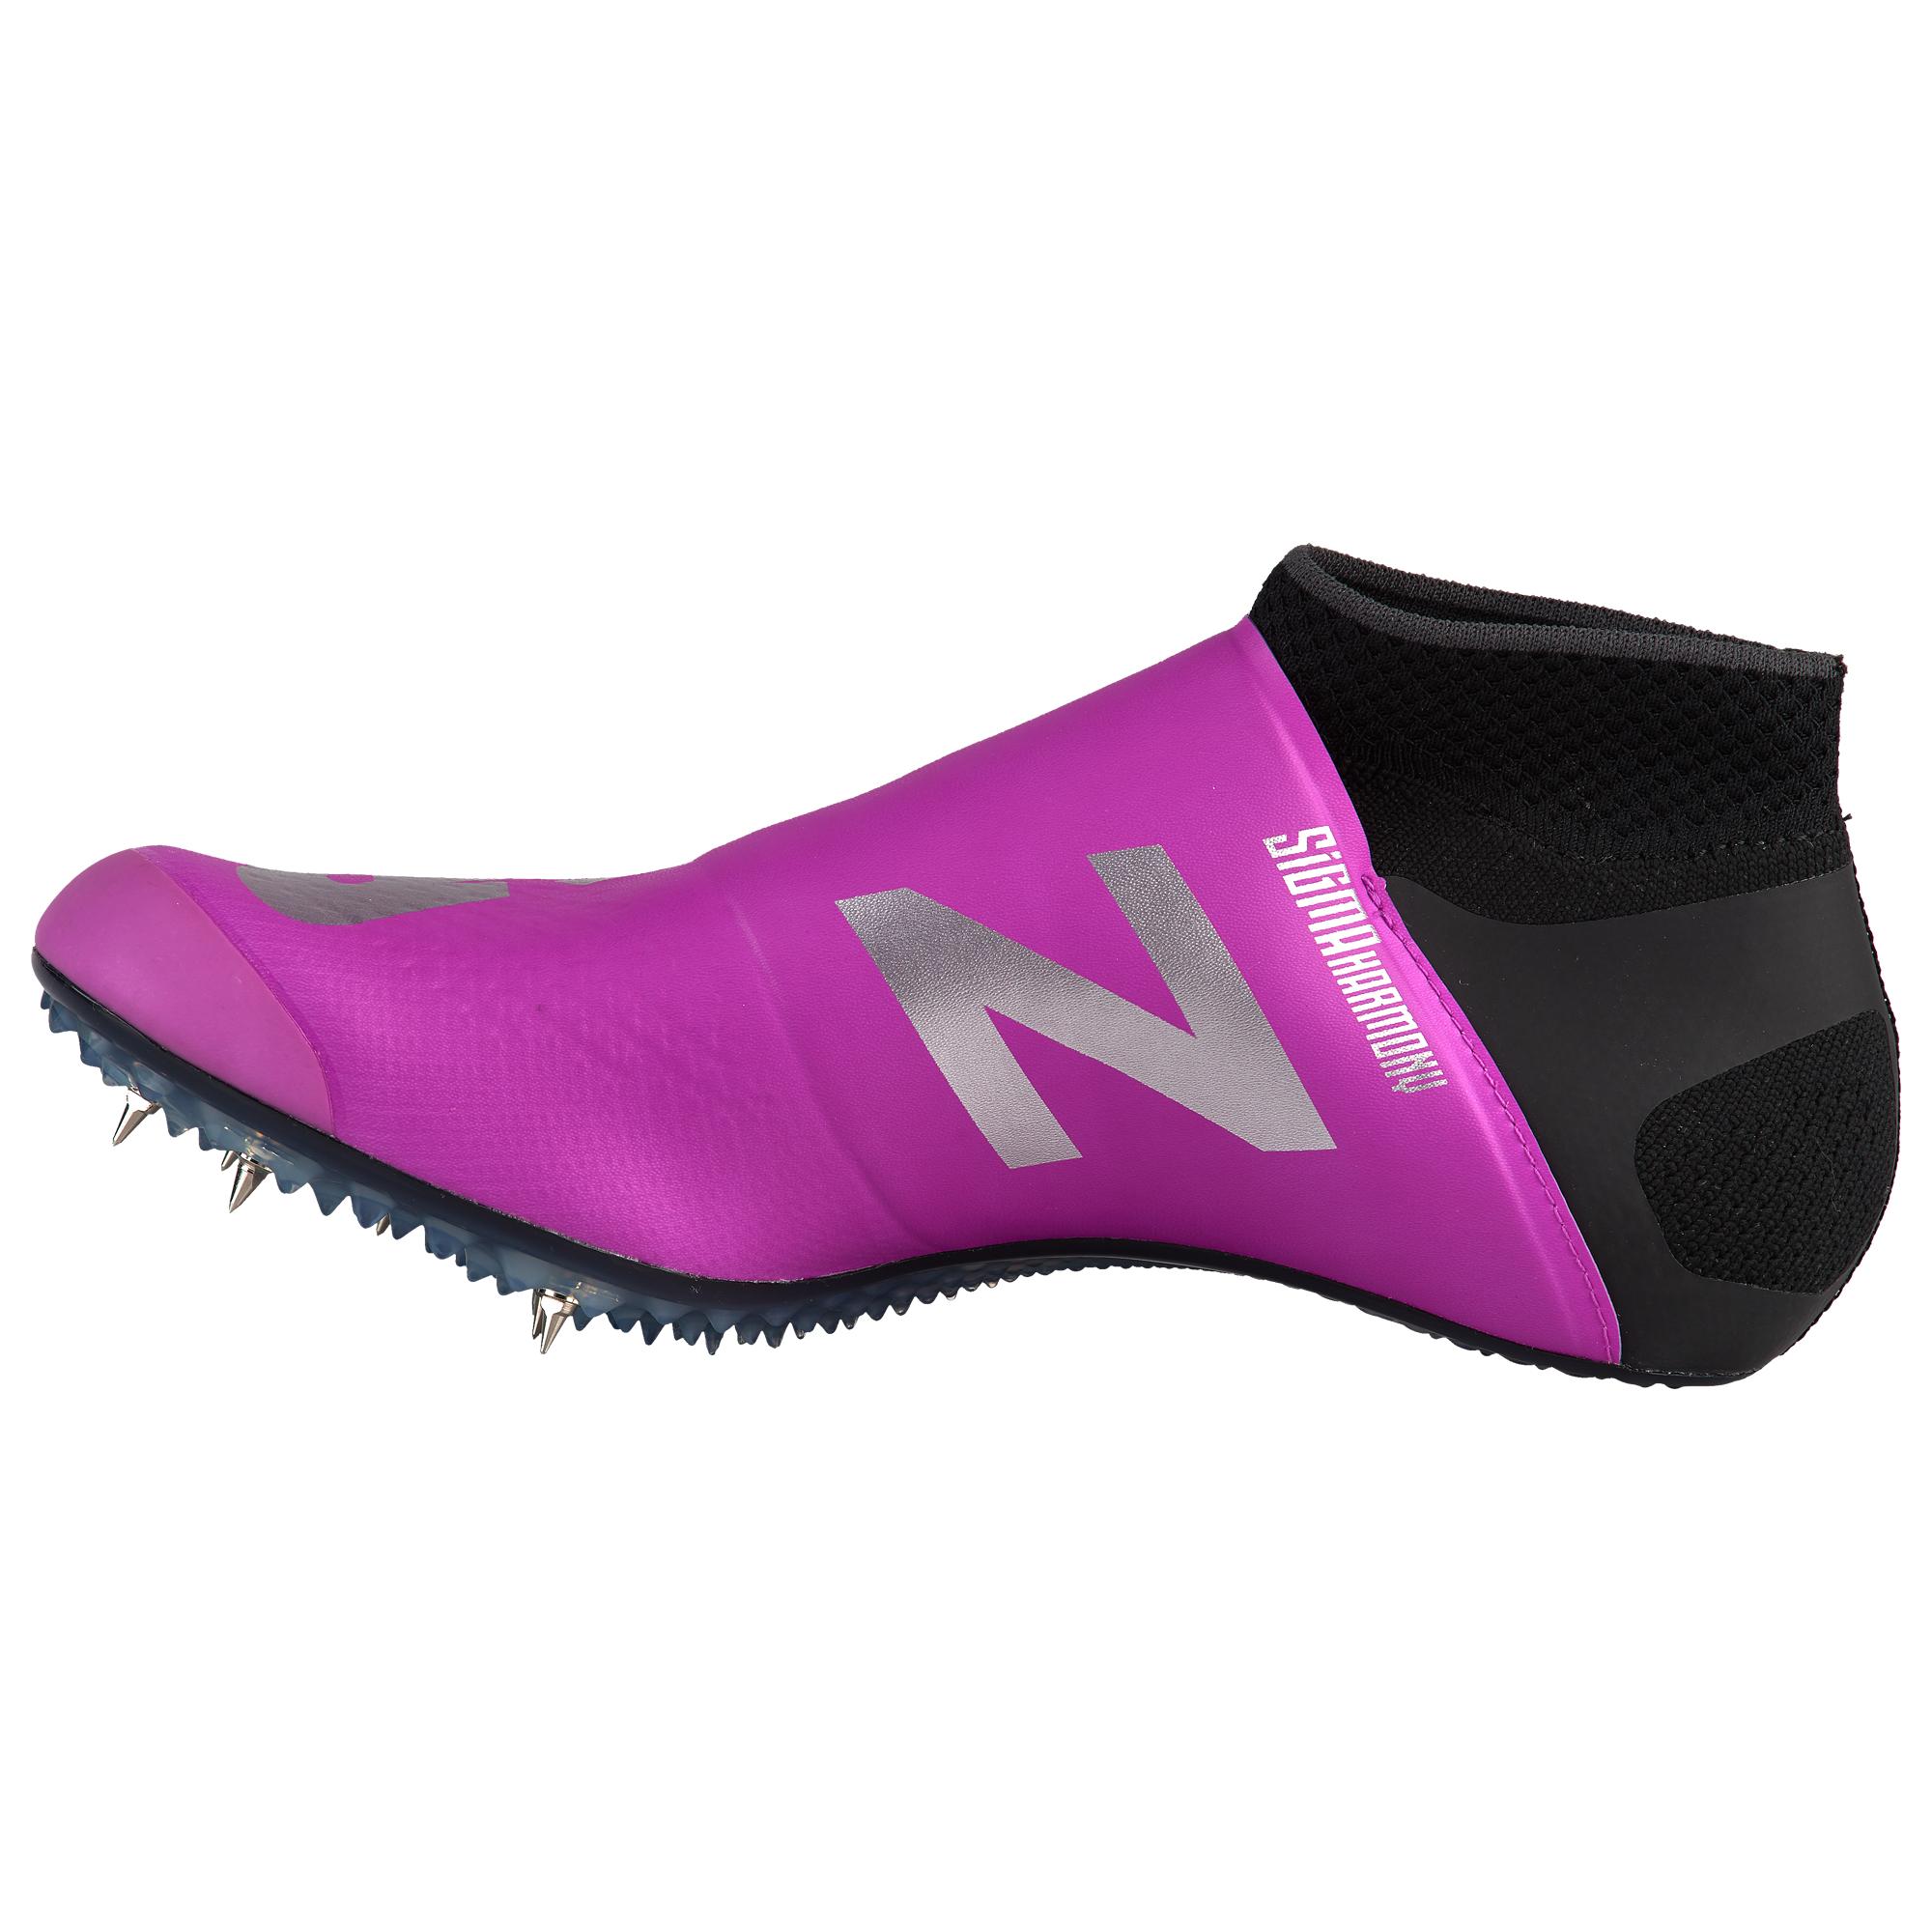 New Balance Sigma Harmony Sprint Spikes in Purple for Men - Lyst